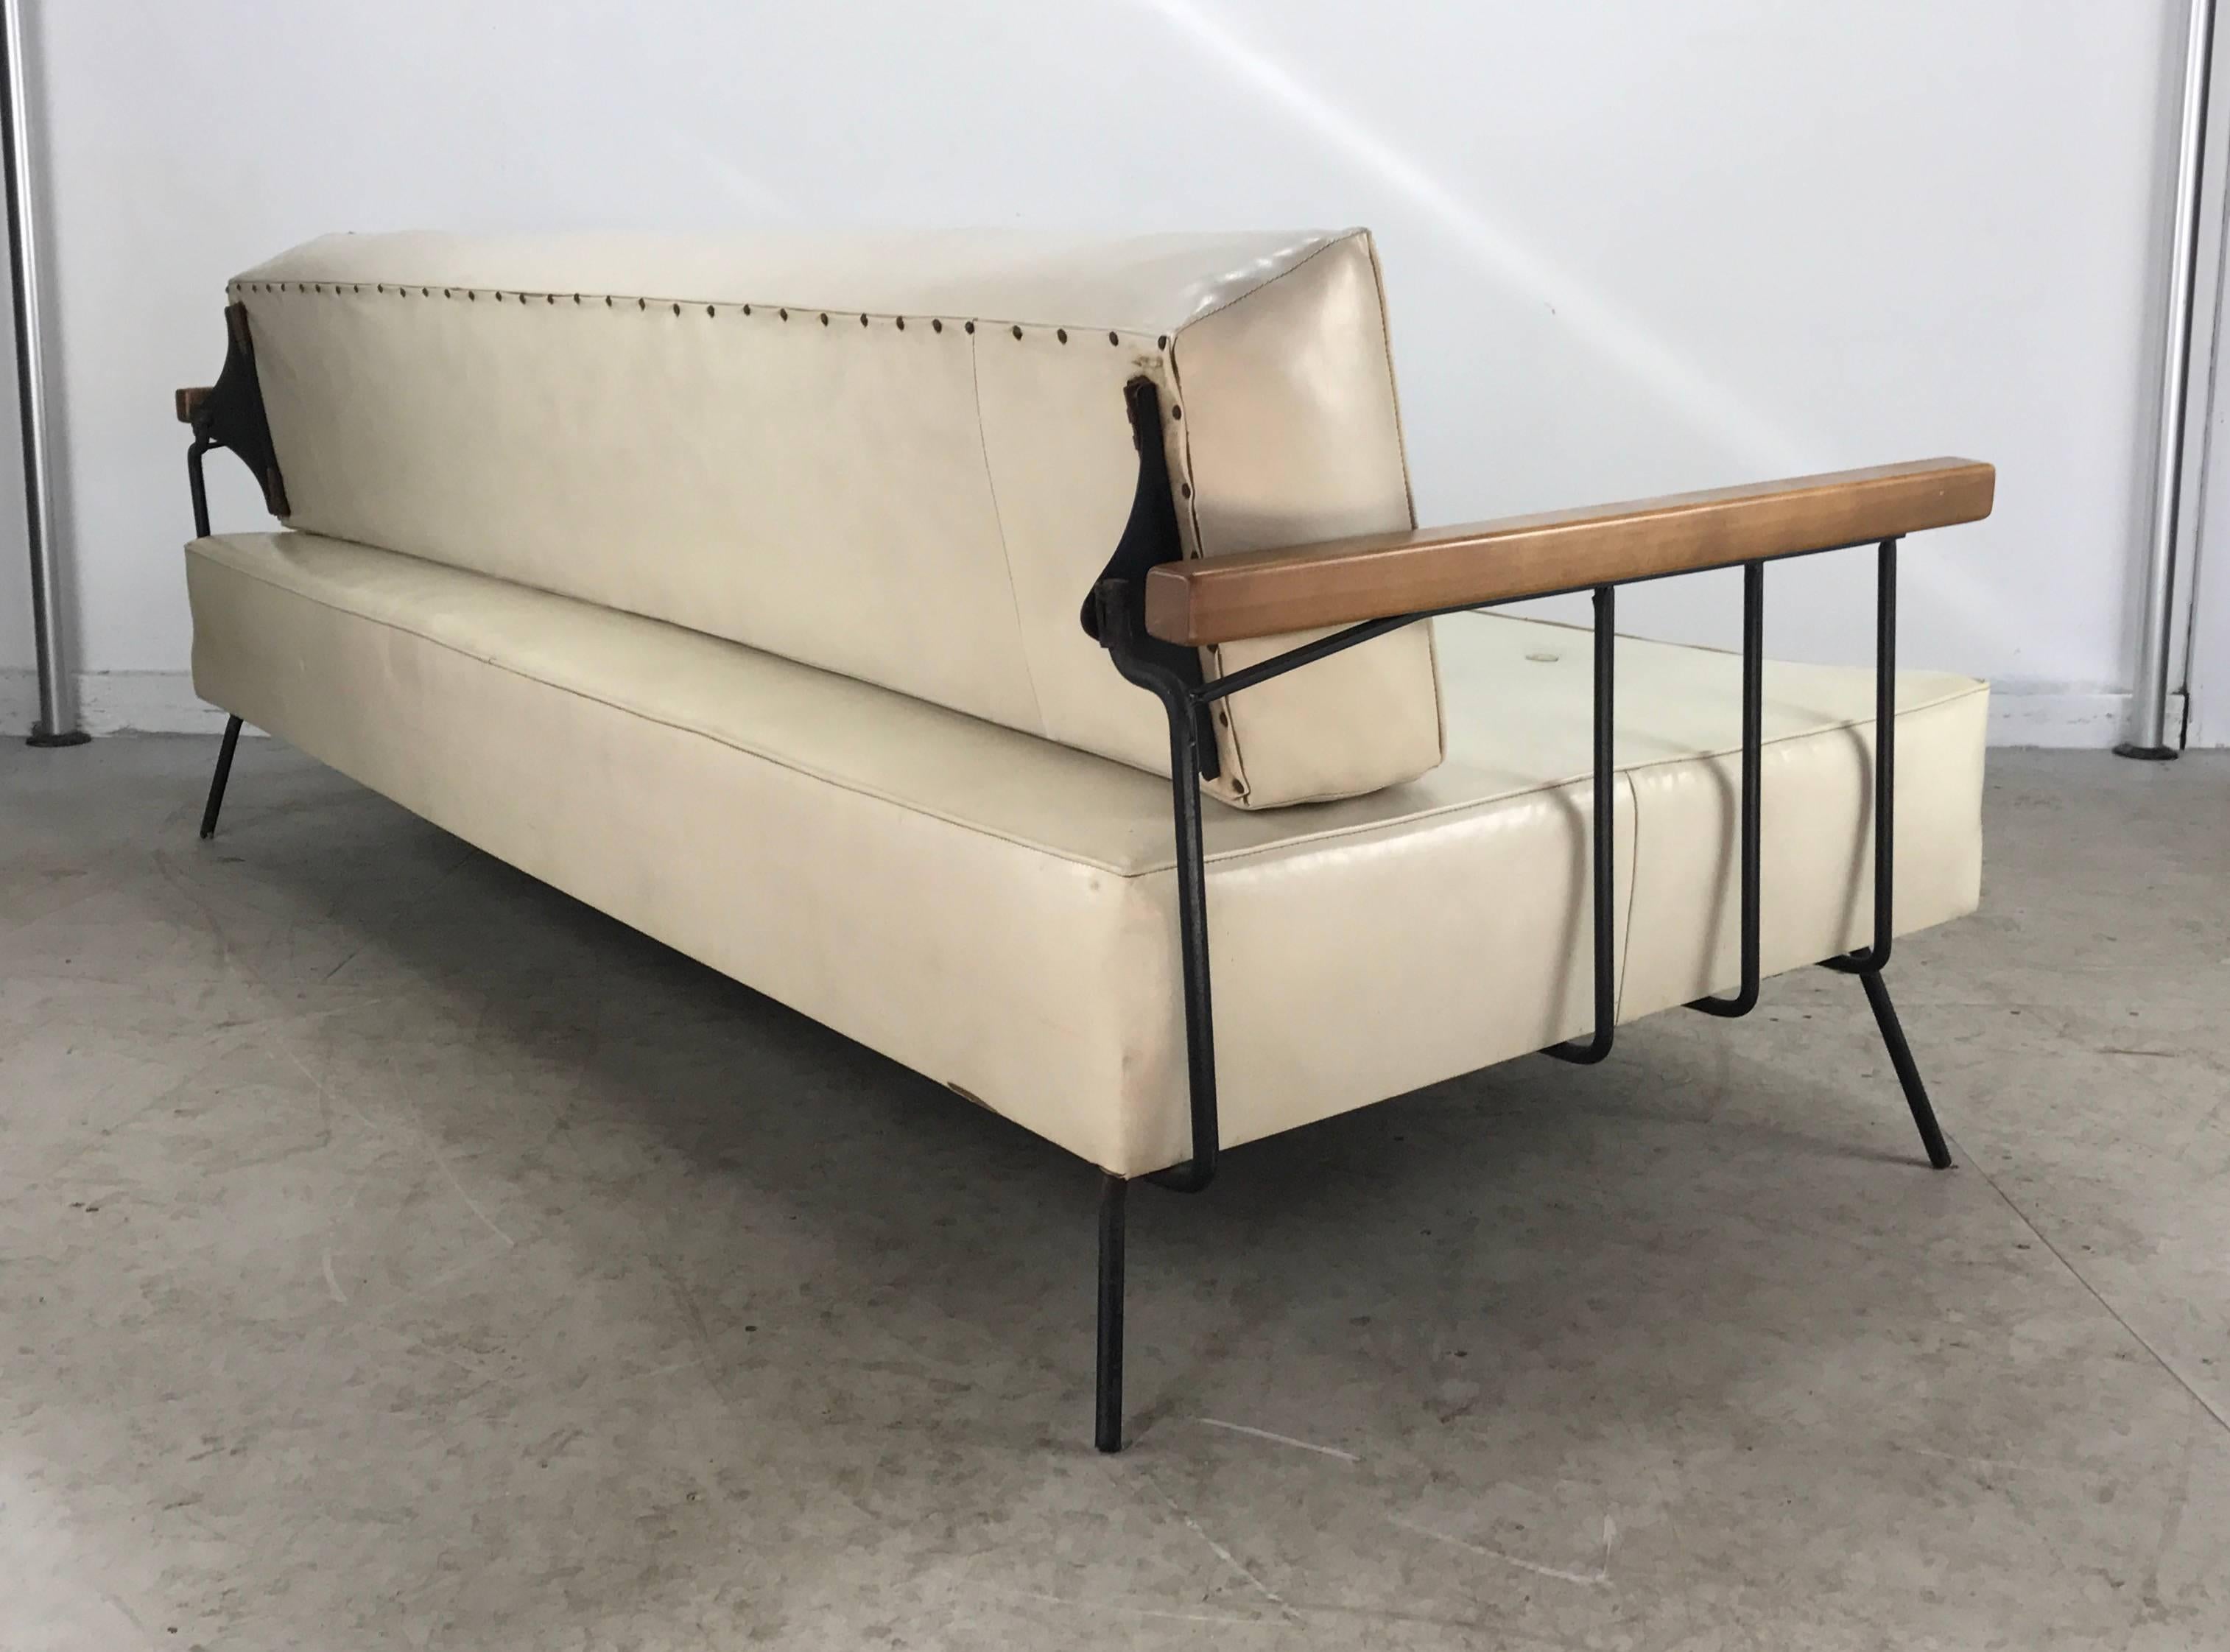 American Classic Modernist Iron and Wood Sofa/Daybed in the Manner of Weinberg-Salterini